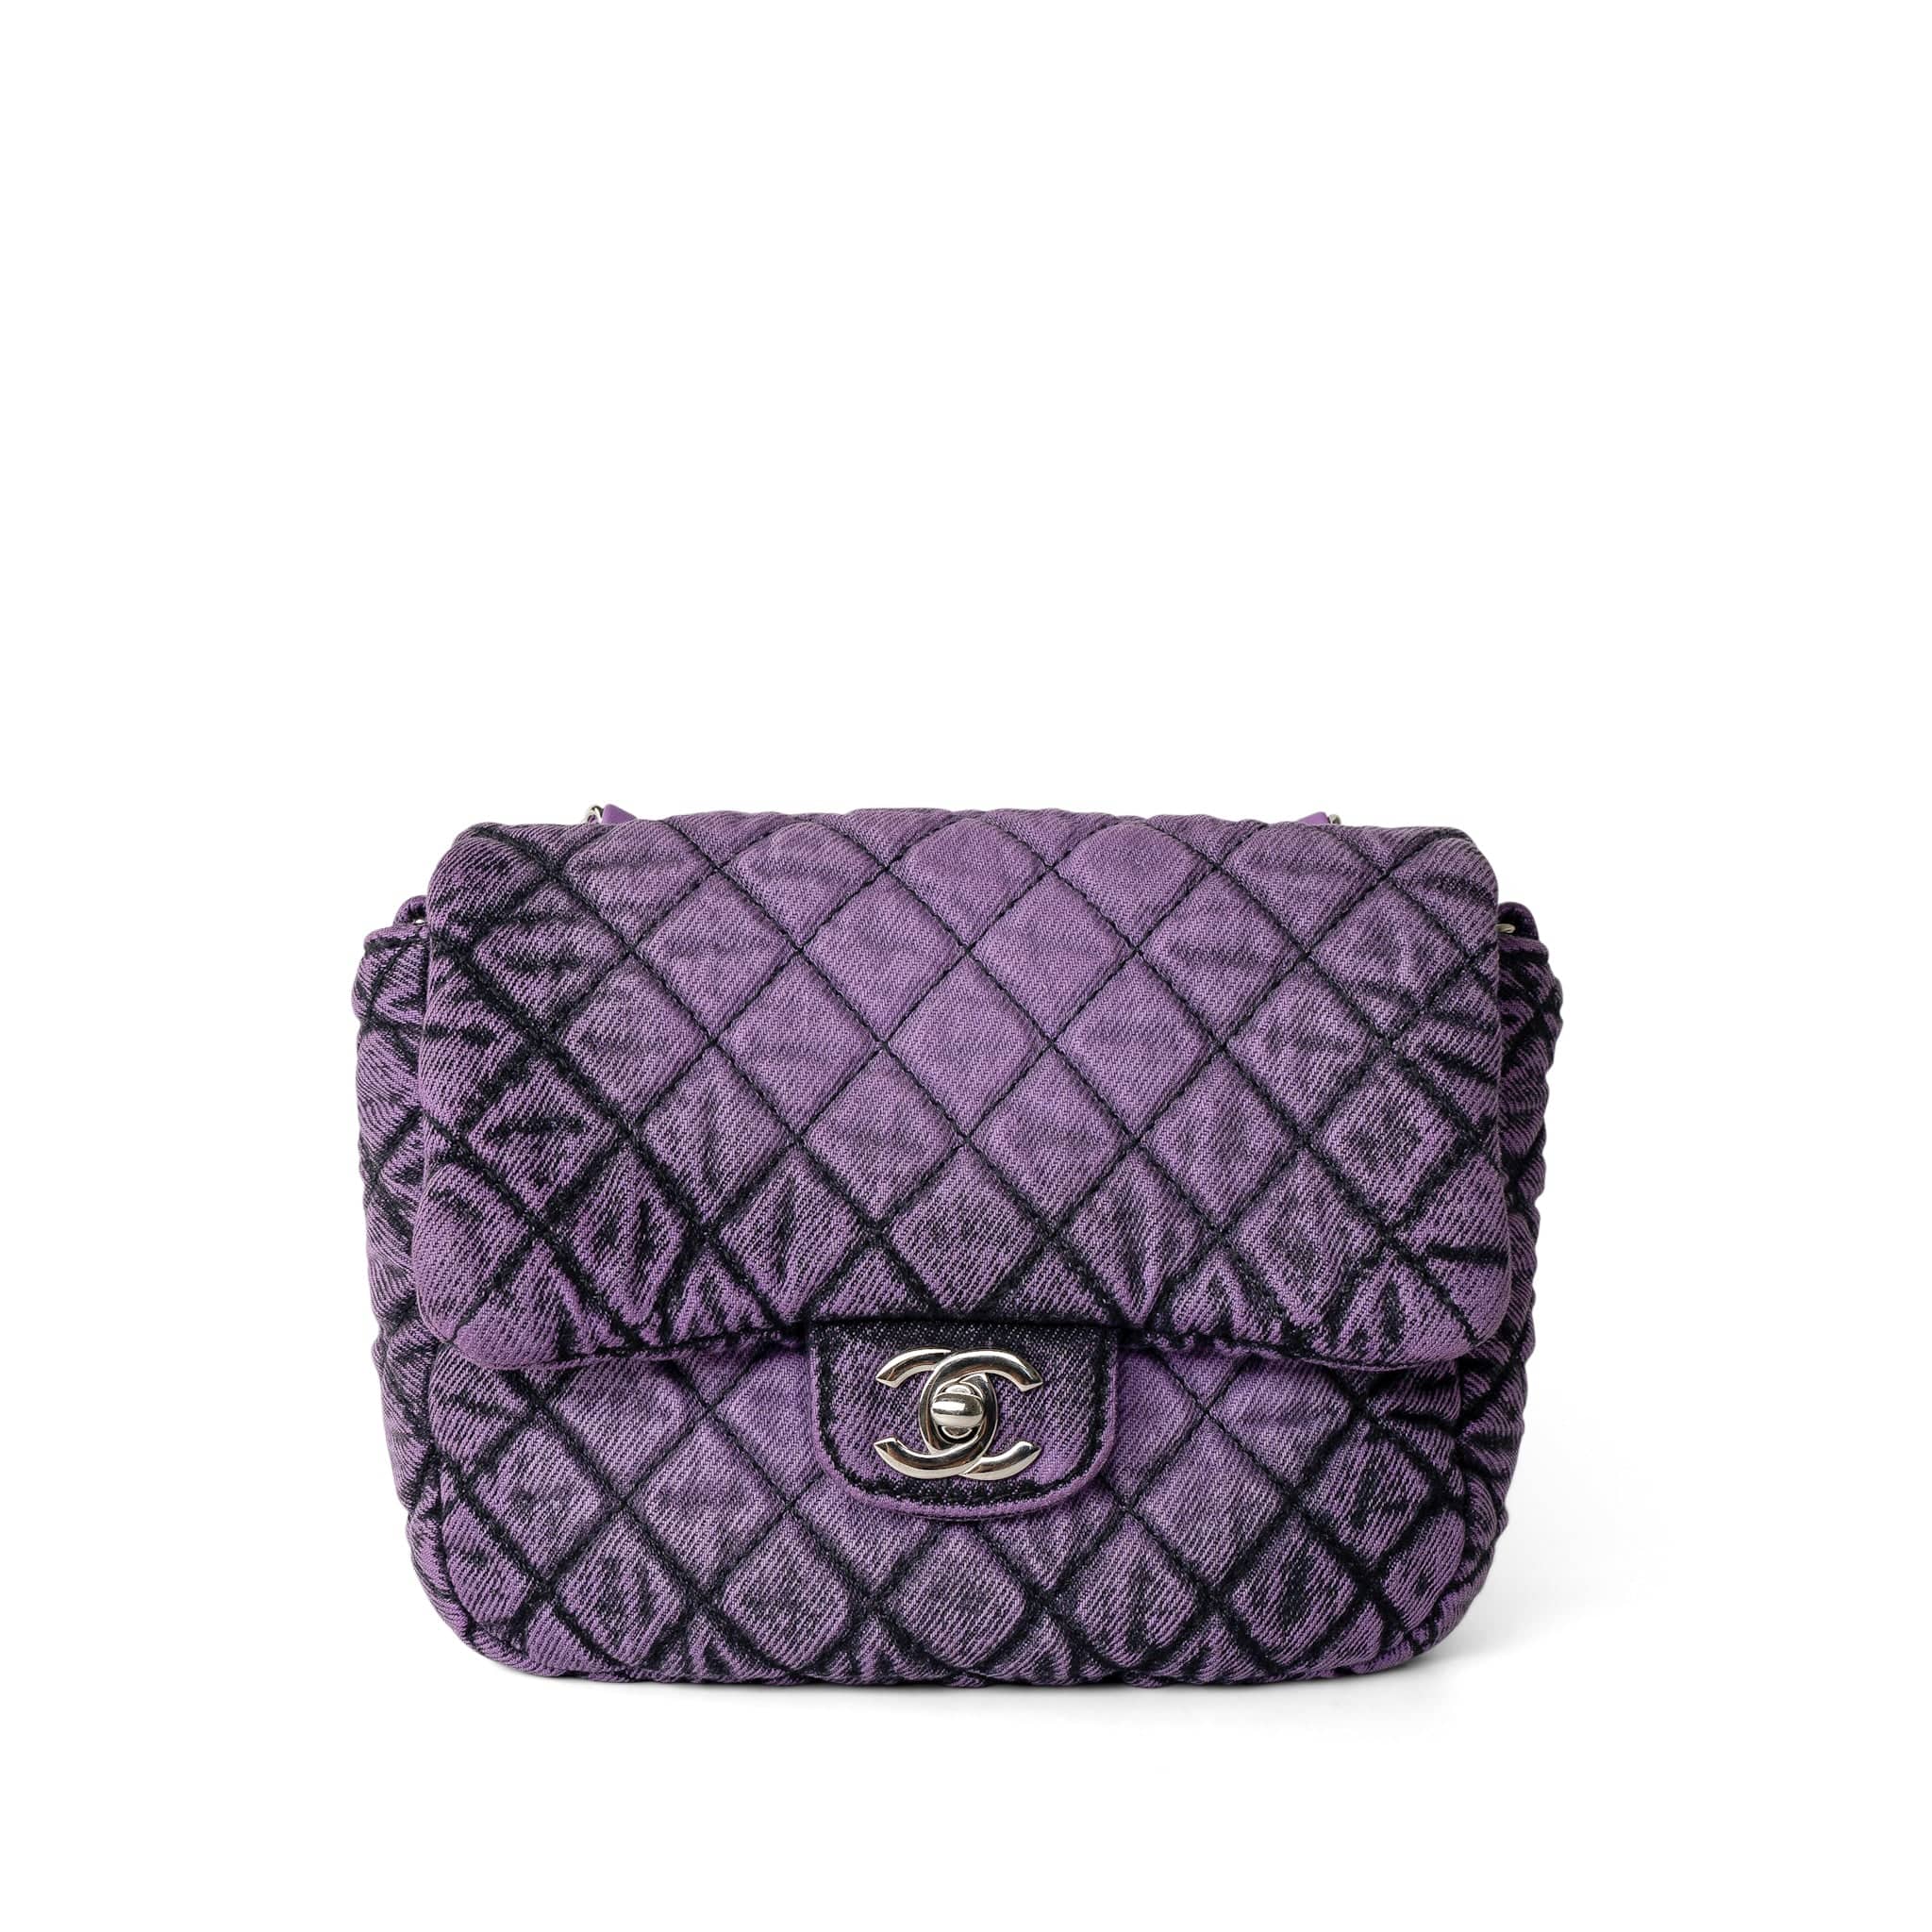 CHANEL Handbag Purple Washed Denim Quilted Small Purple Denimpression Flap Silver Hardware - Redeluxe